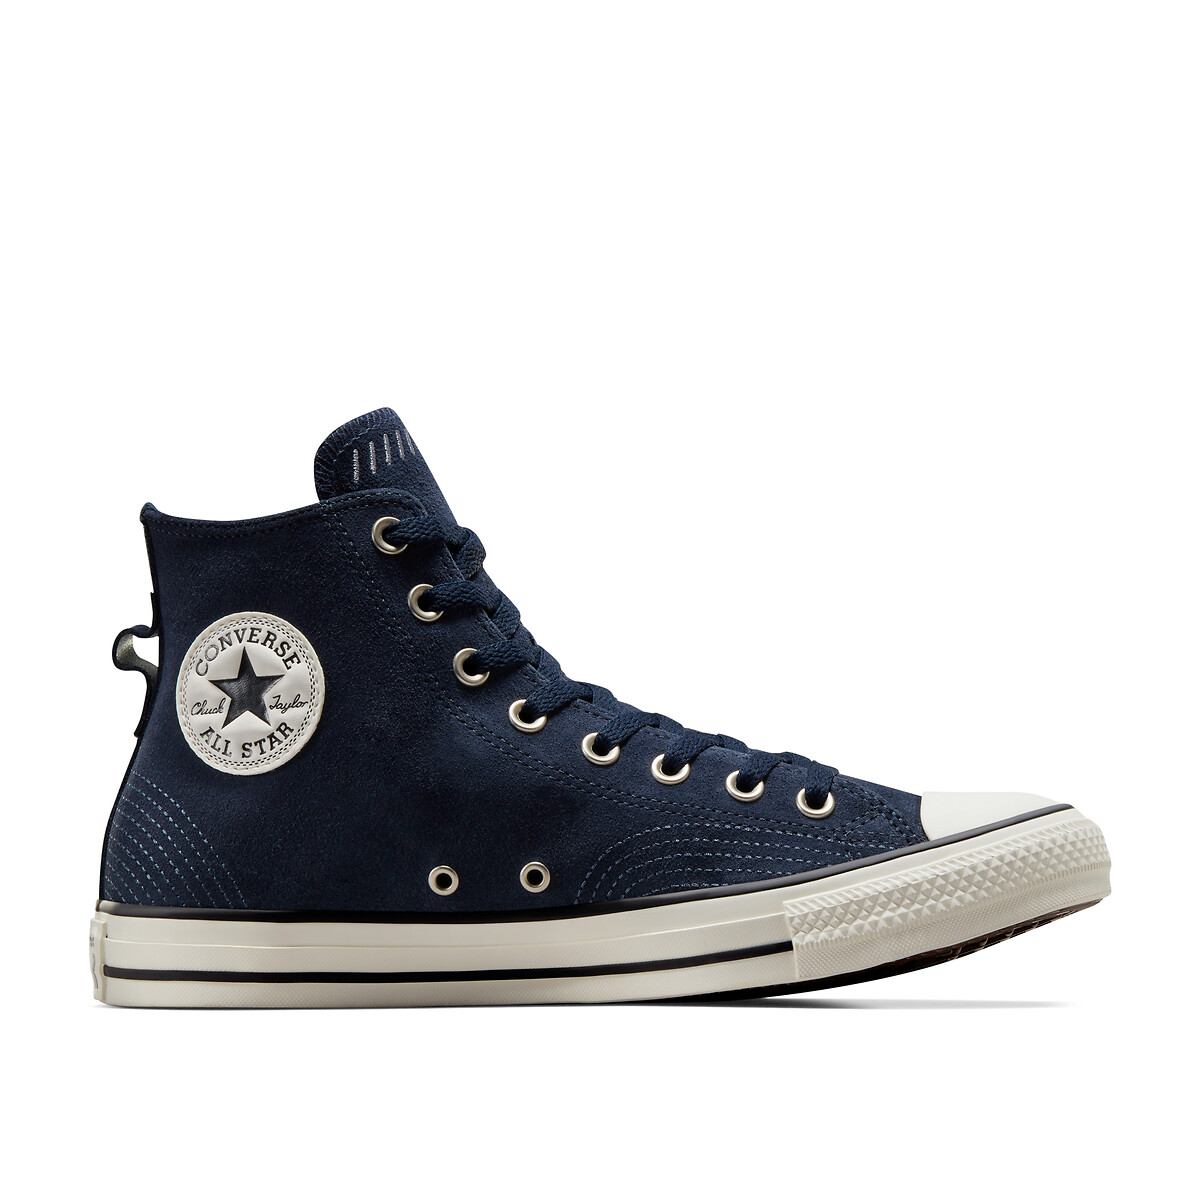 Image of All Star Hi Artisanal Craft Suede High Top Trainers